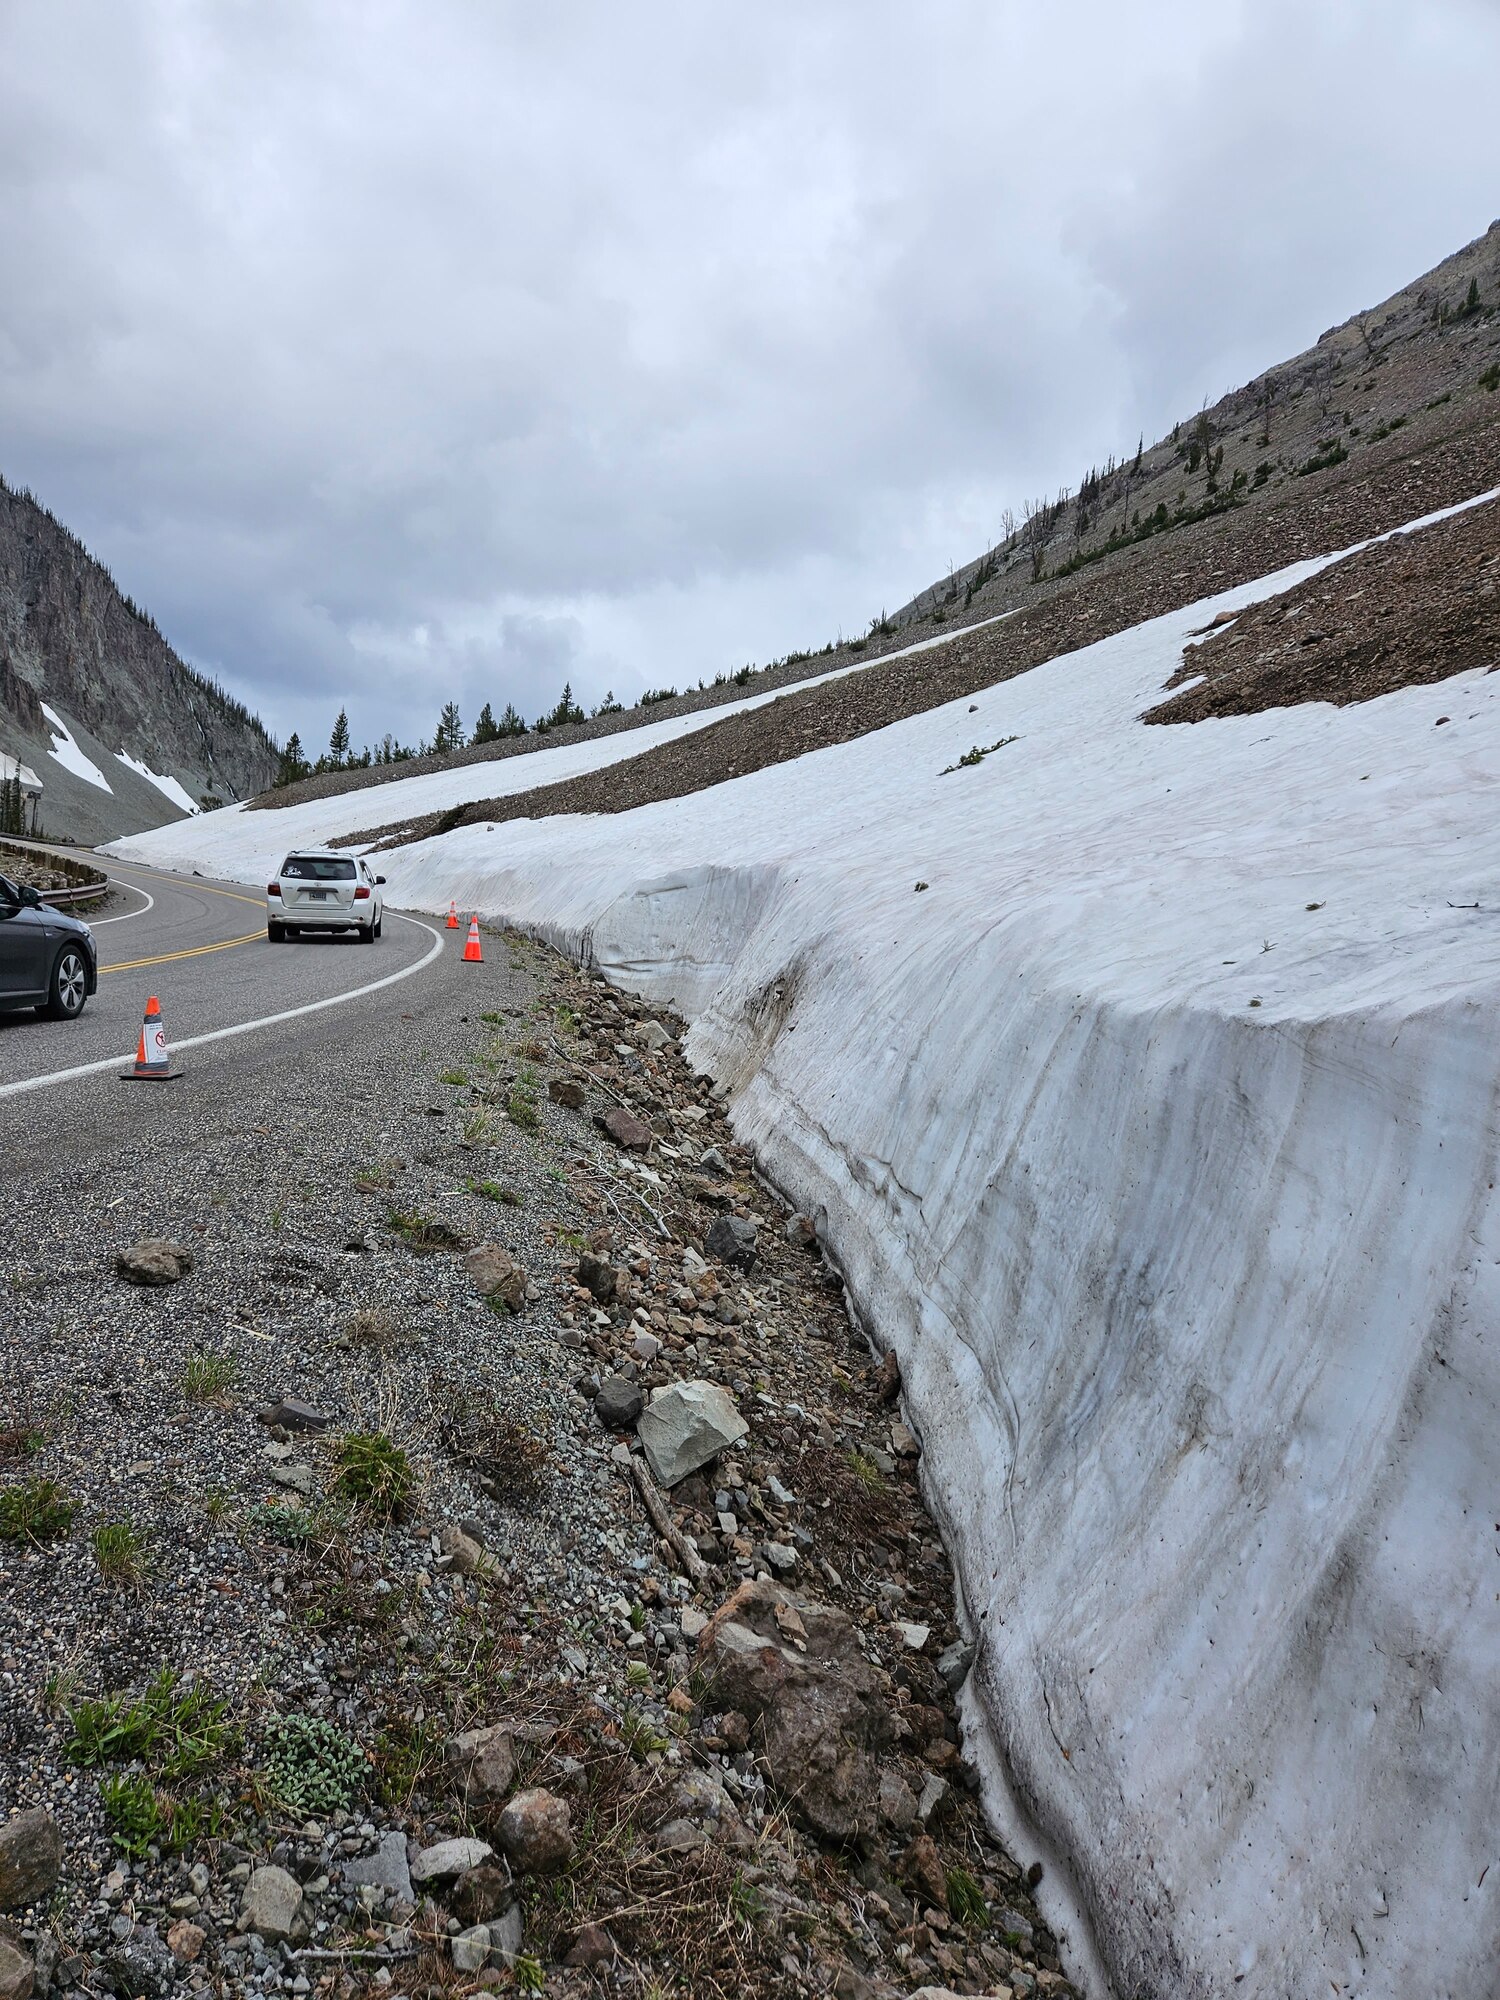 A picture of a mountainside of snow where an explosive was found